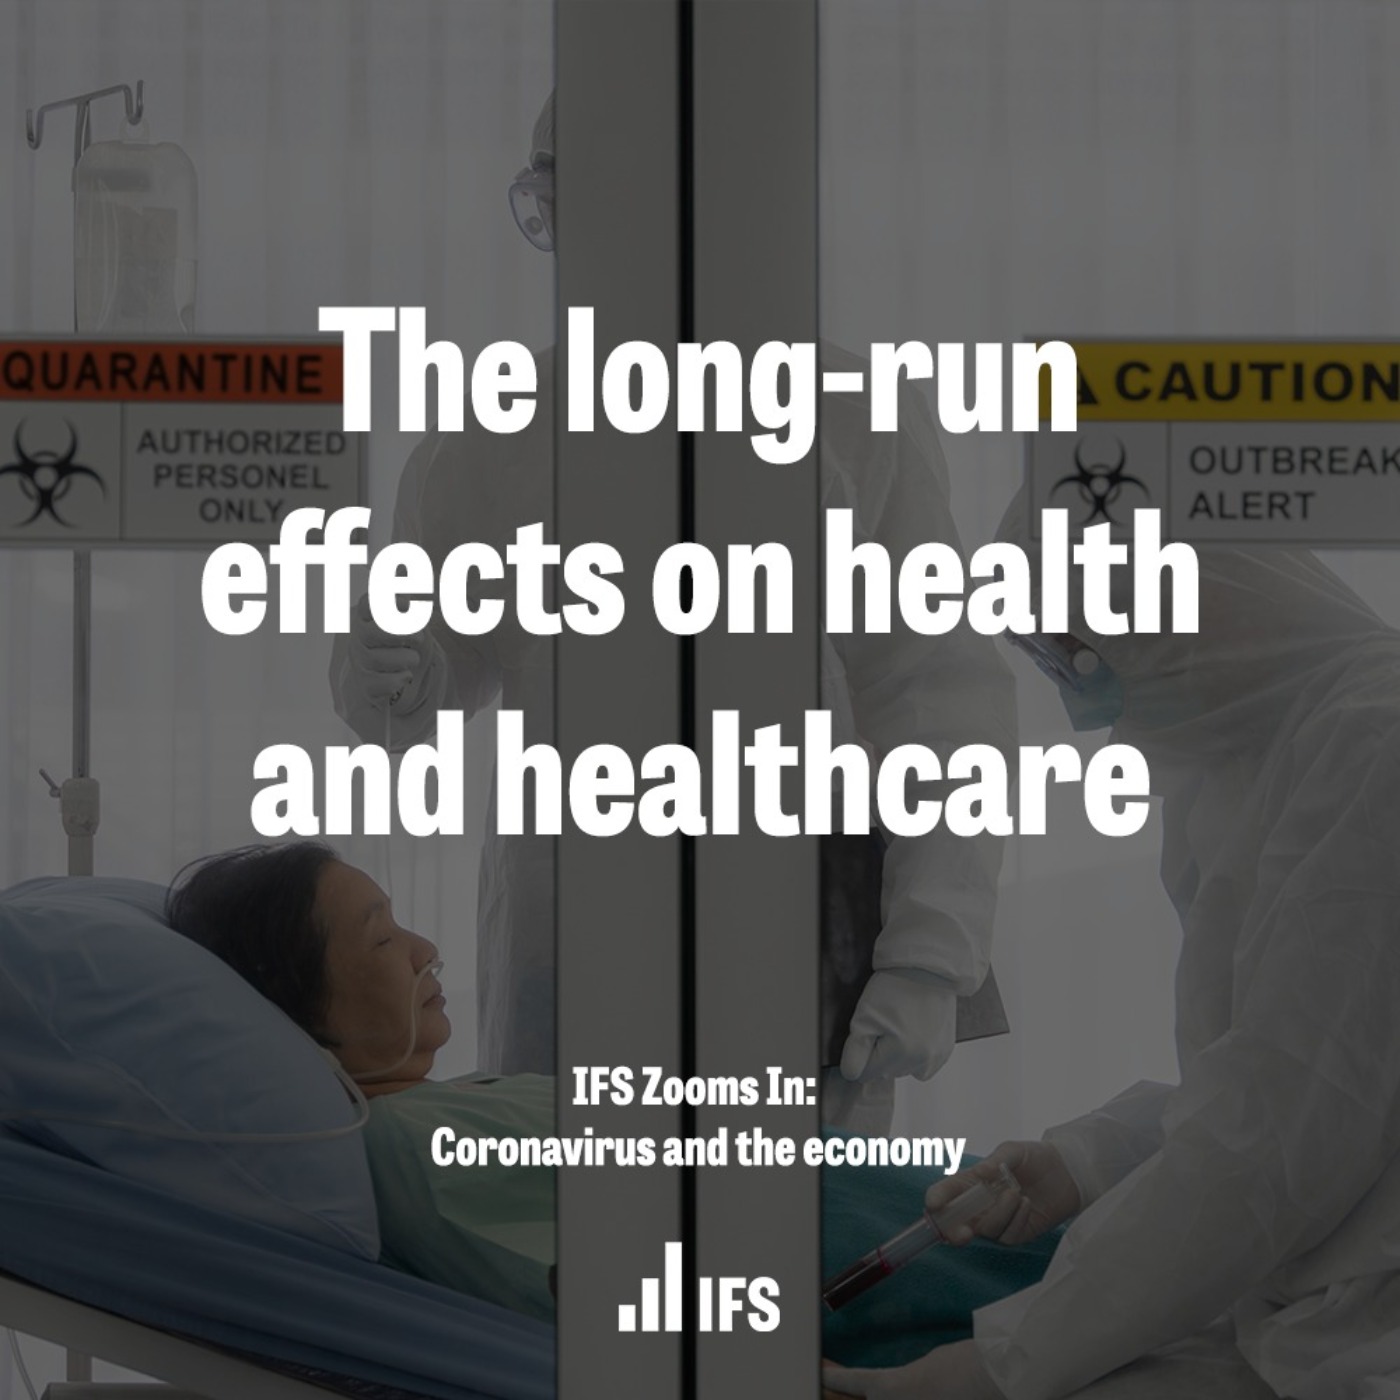 The long-run effects on health and healthcare